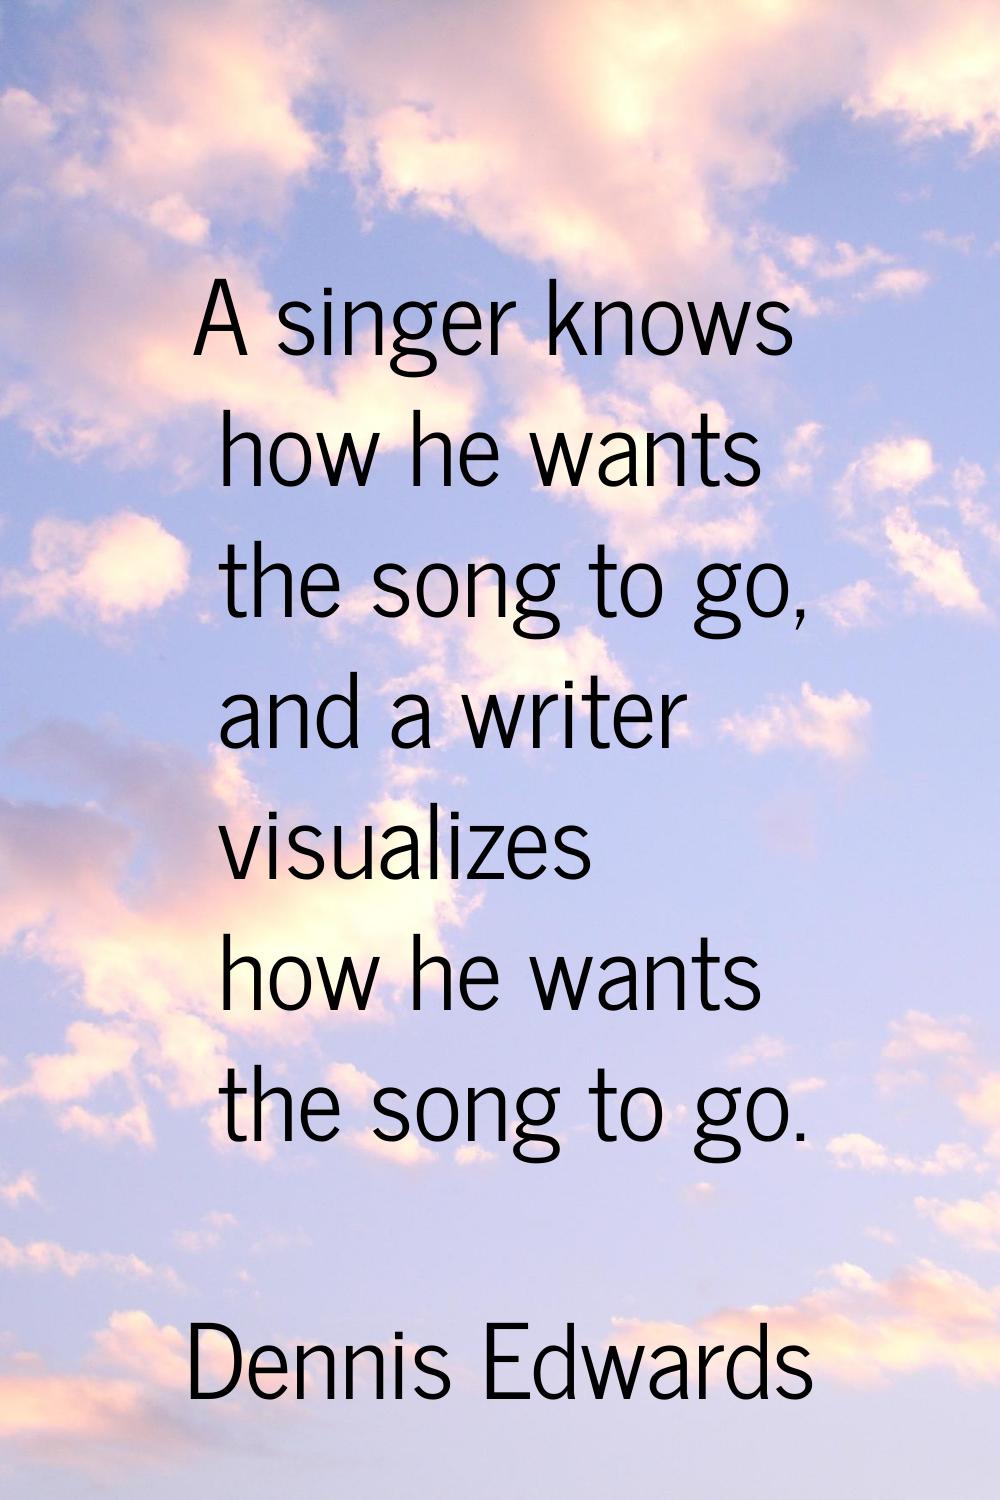 A singer knows how he wants the song to go, and a writer visualizes how he wants the song to go.